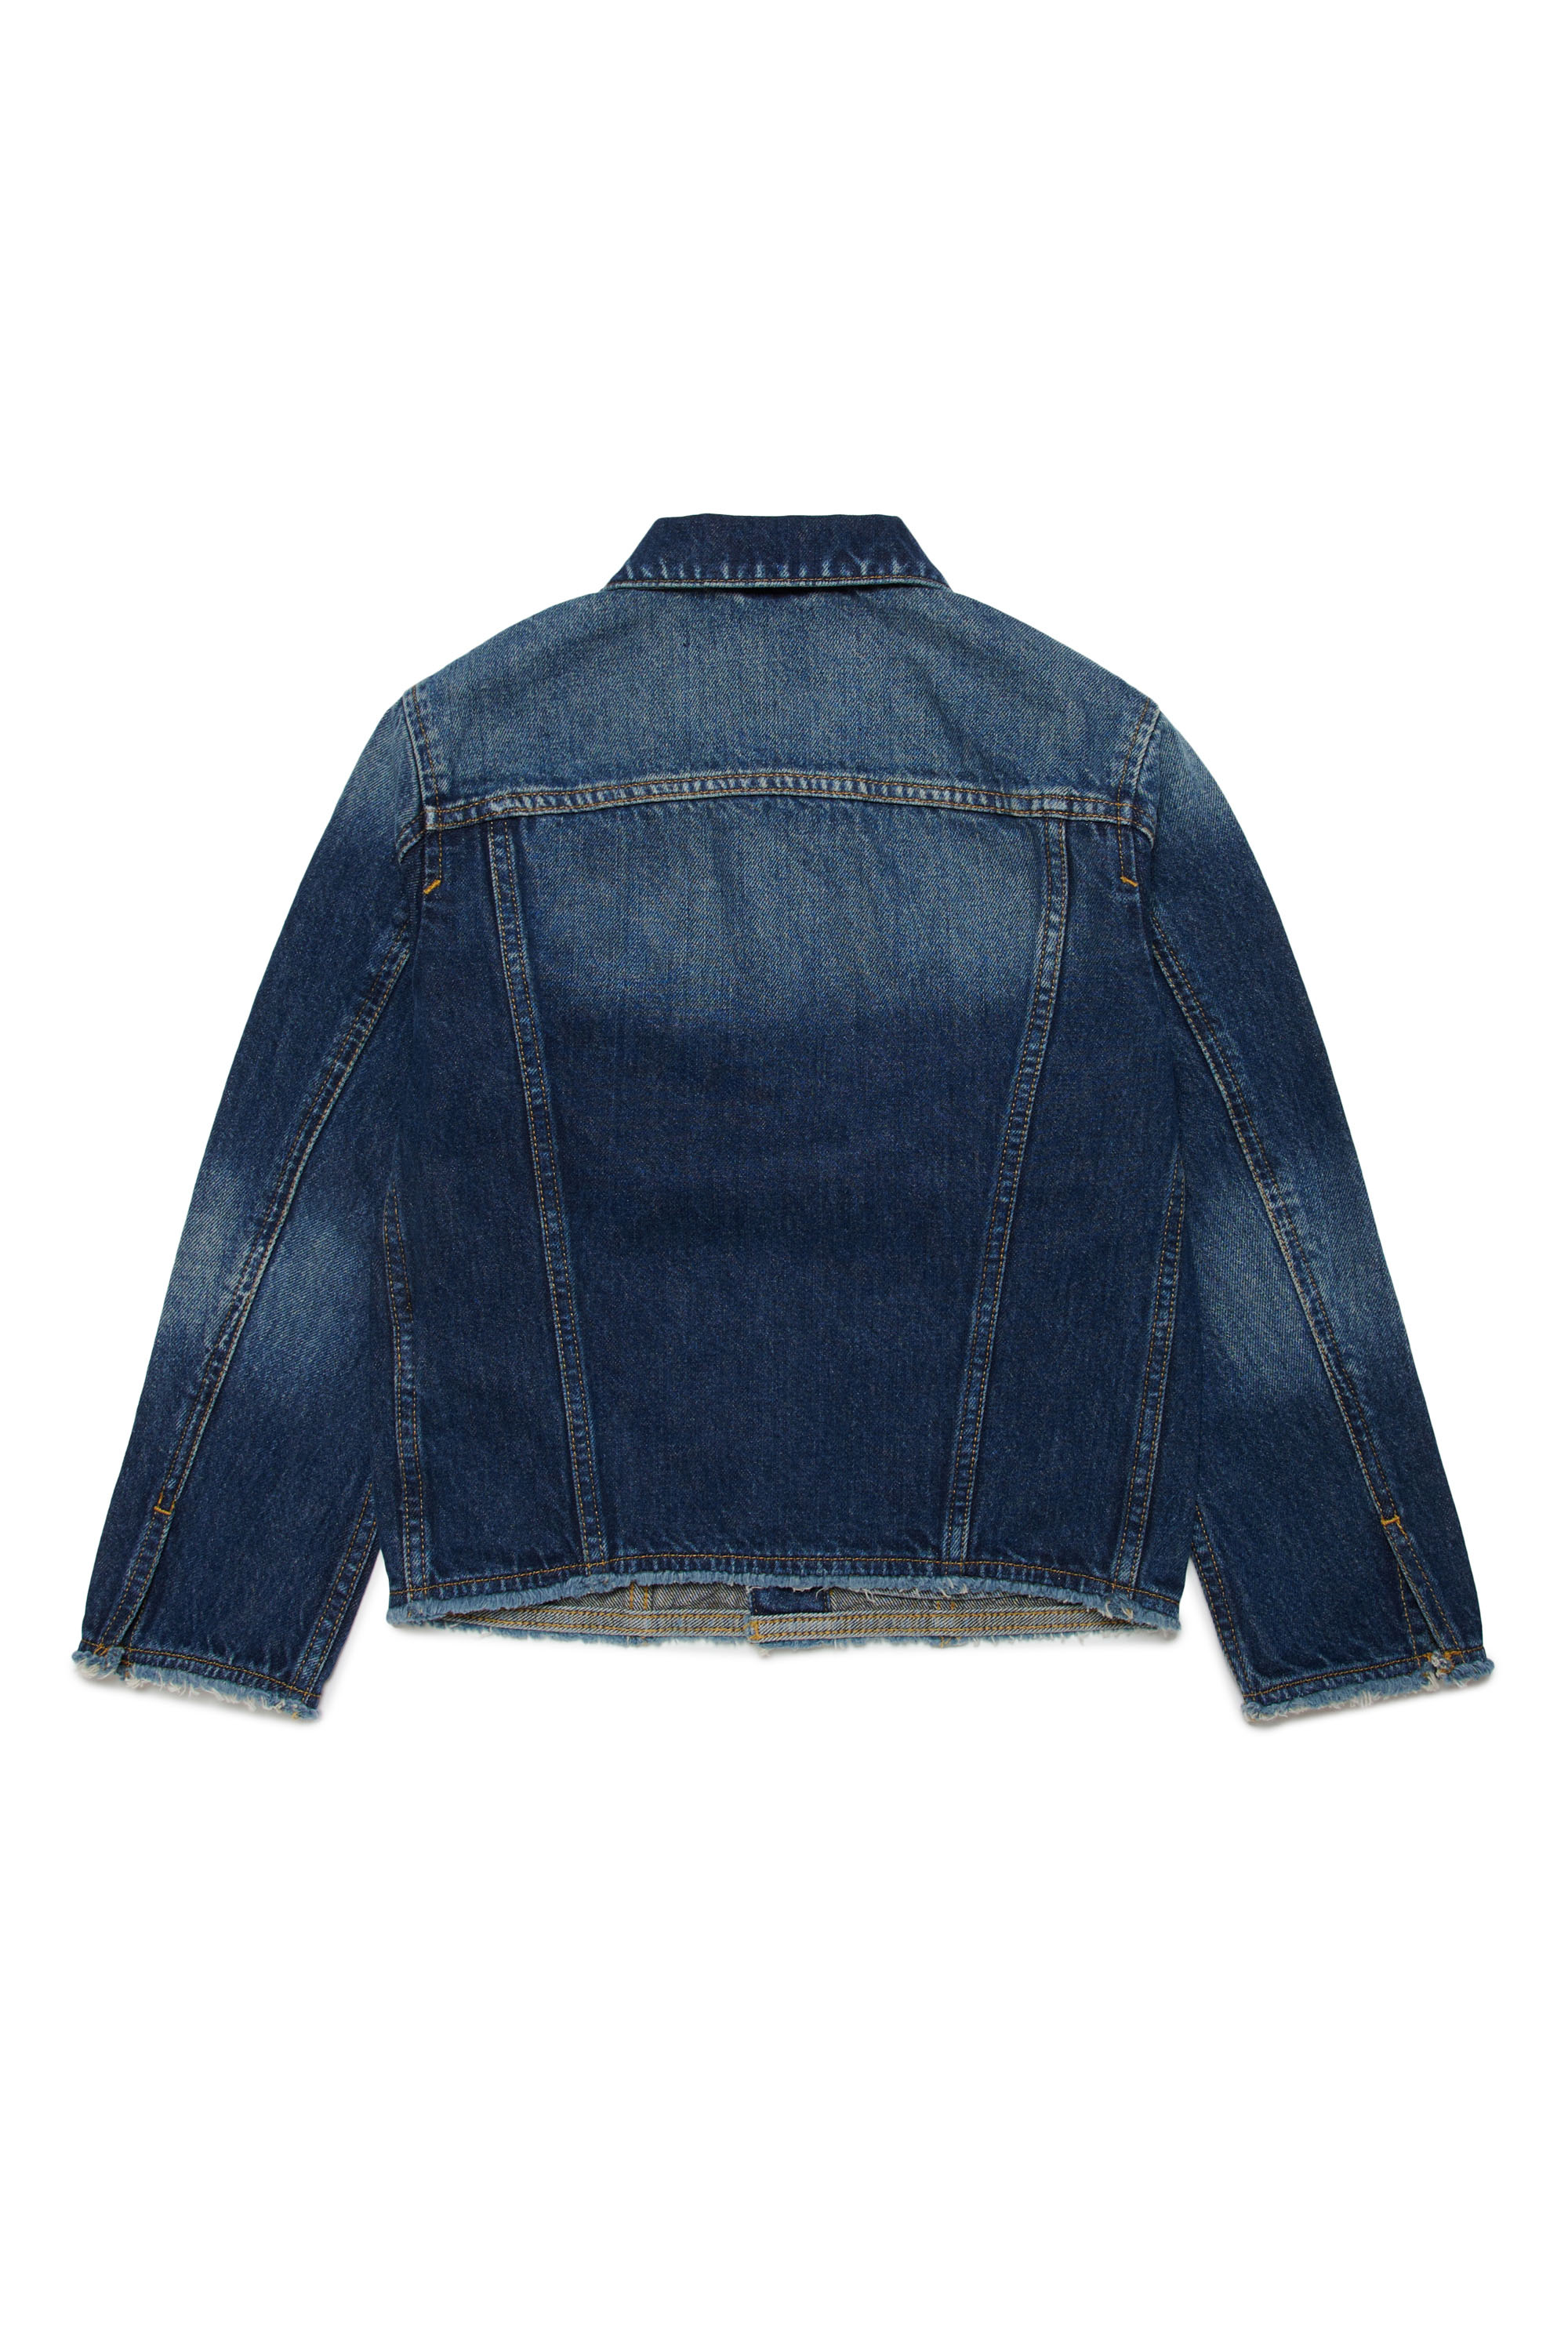 Diesel - JBARCY-J-S, Unisex Trucker jacket with frayed edges in Blue - Image 3